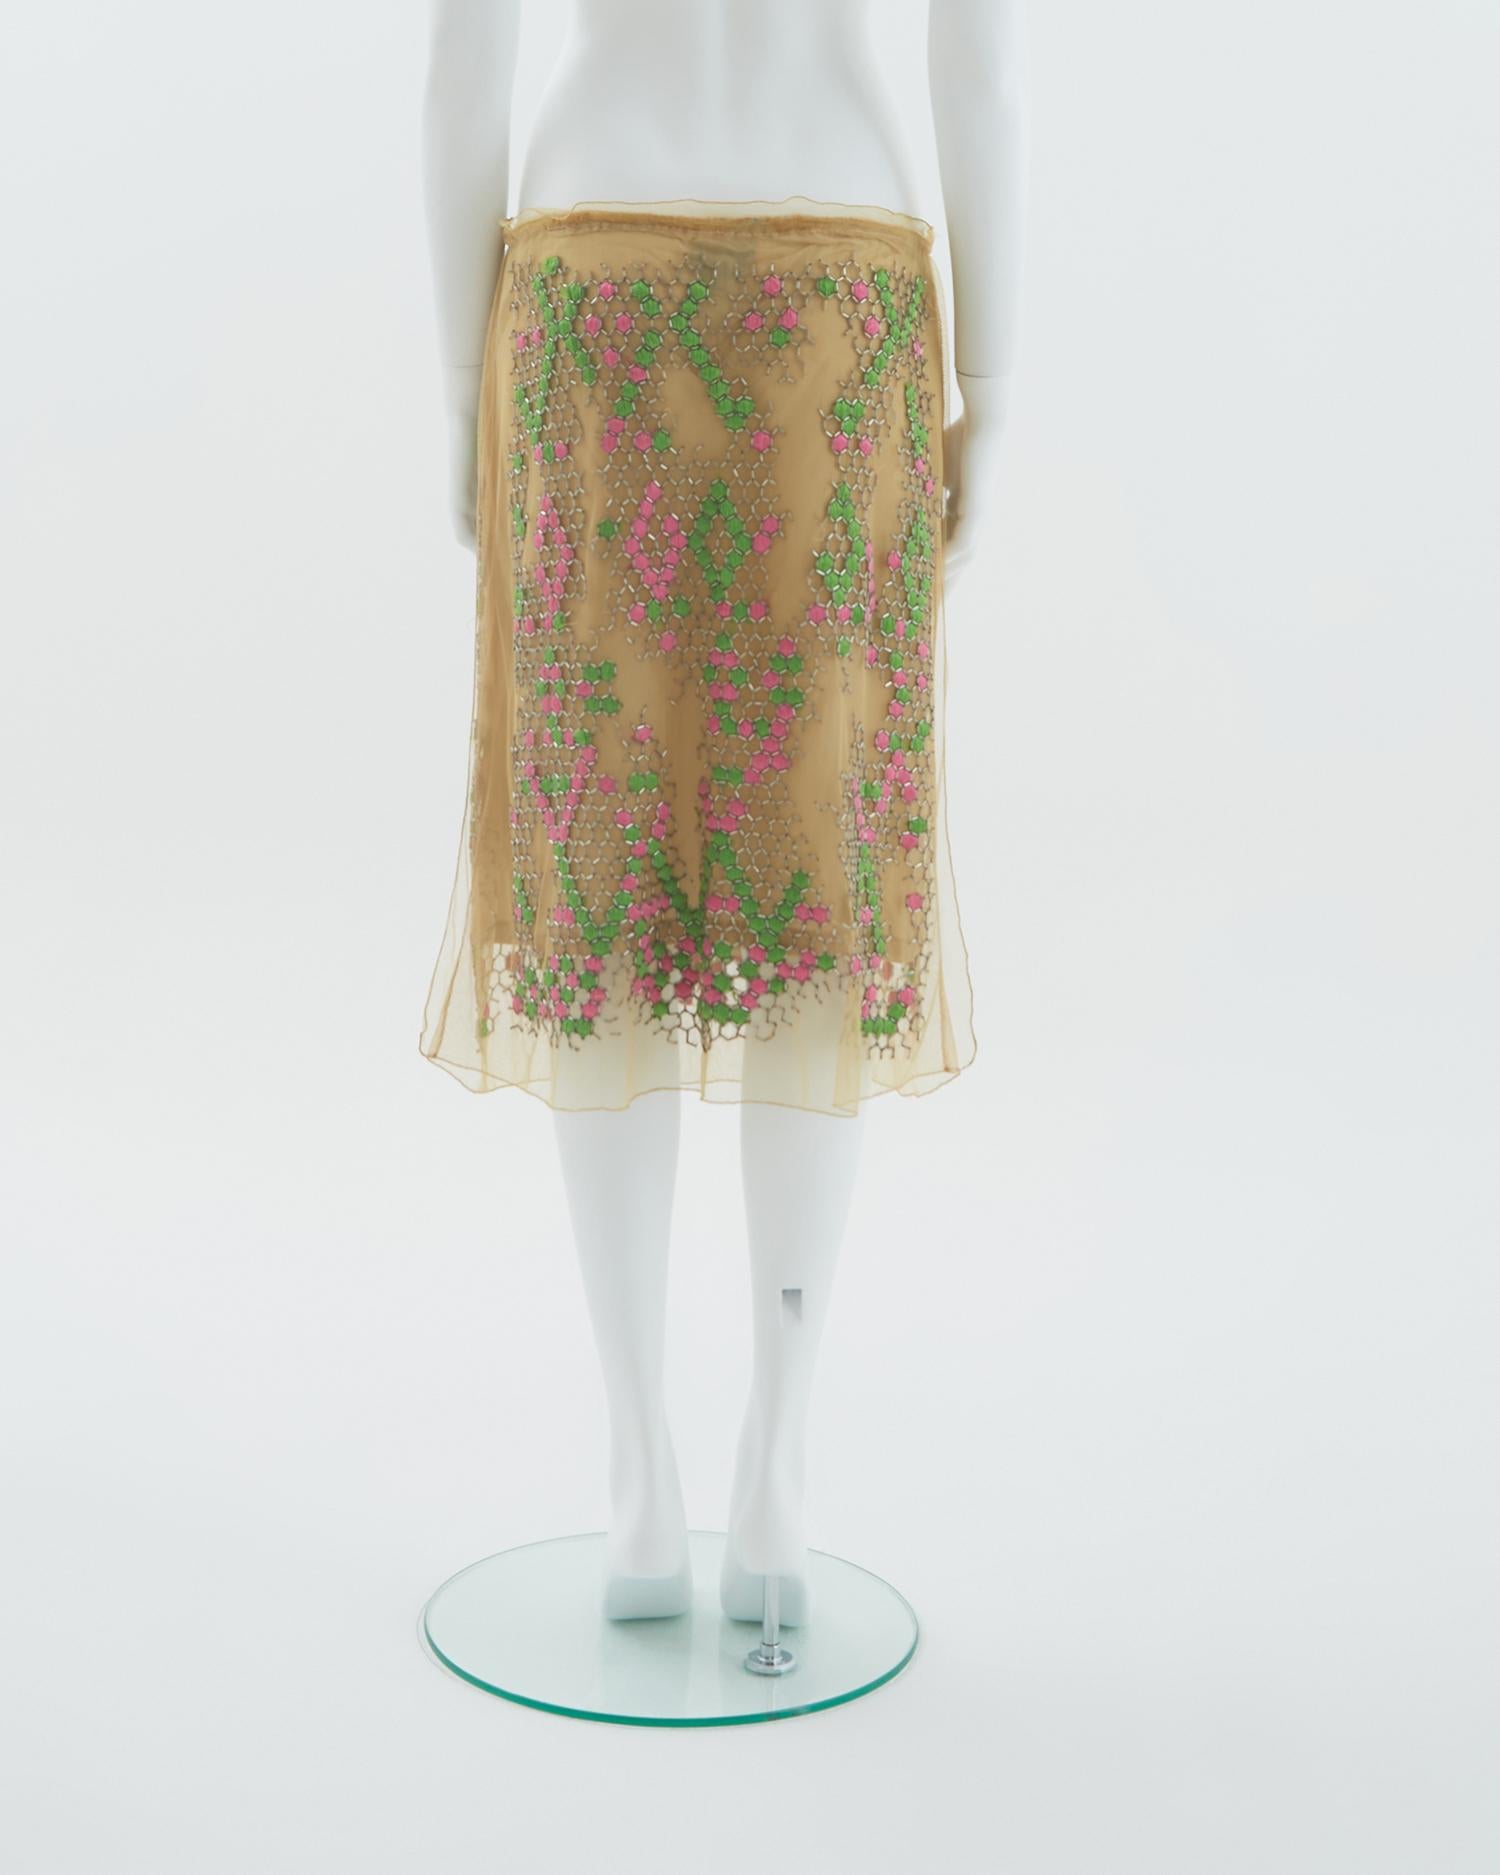 Fendi S/S 2000 Embroidered Mesh Skirt In Excellent Condition For Sale In Milano, IT